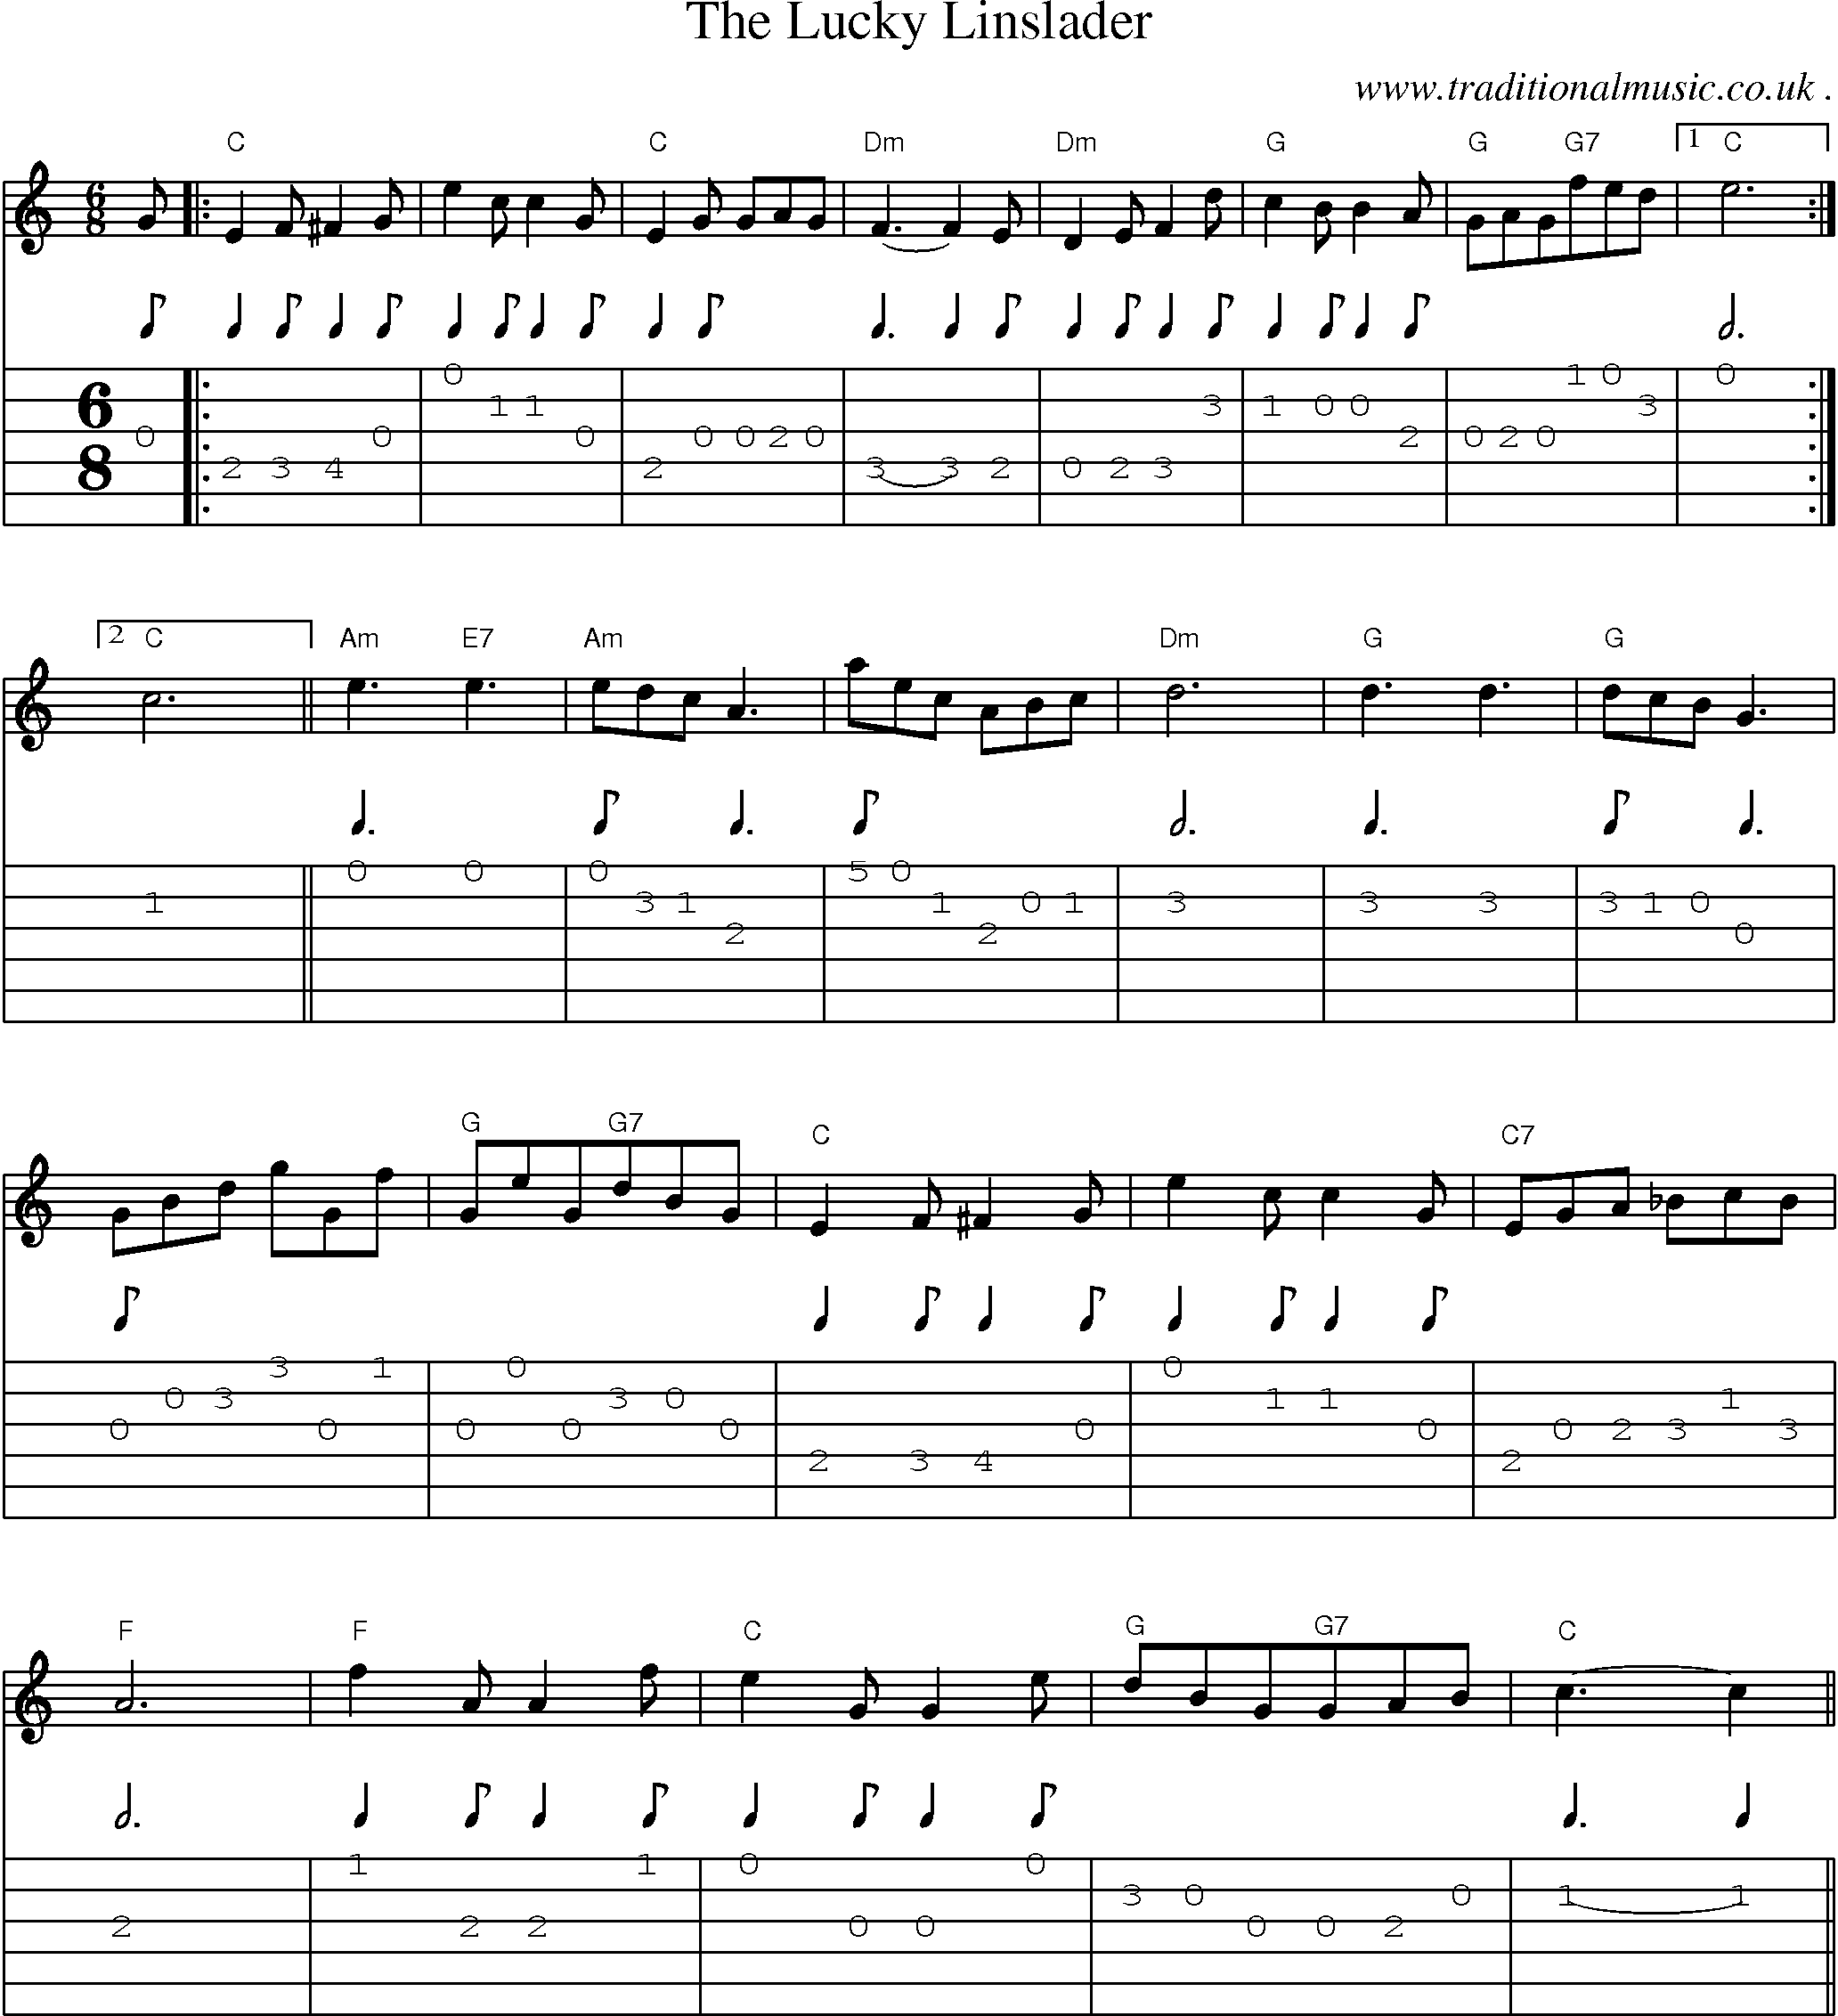 Sheet-Music and Guitar Tabs for The Lucky Linslader